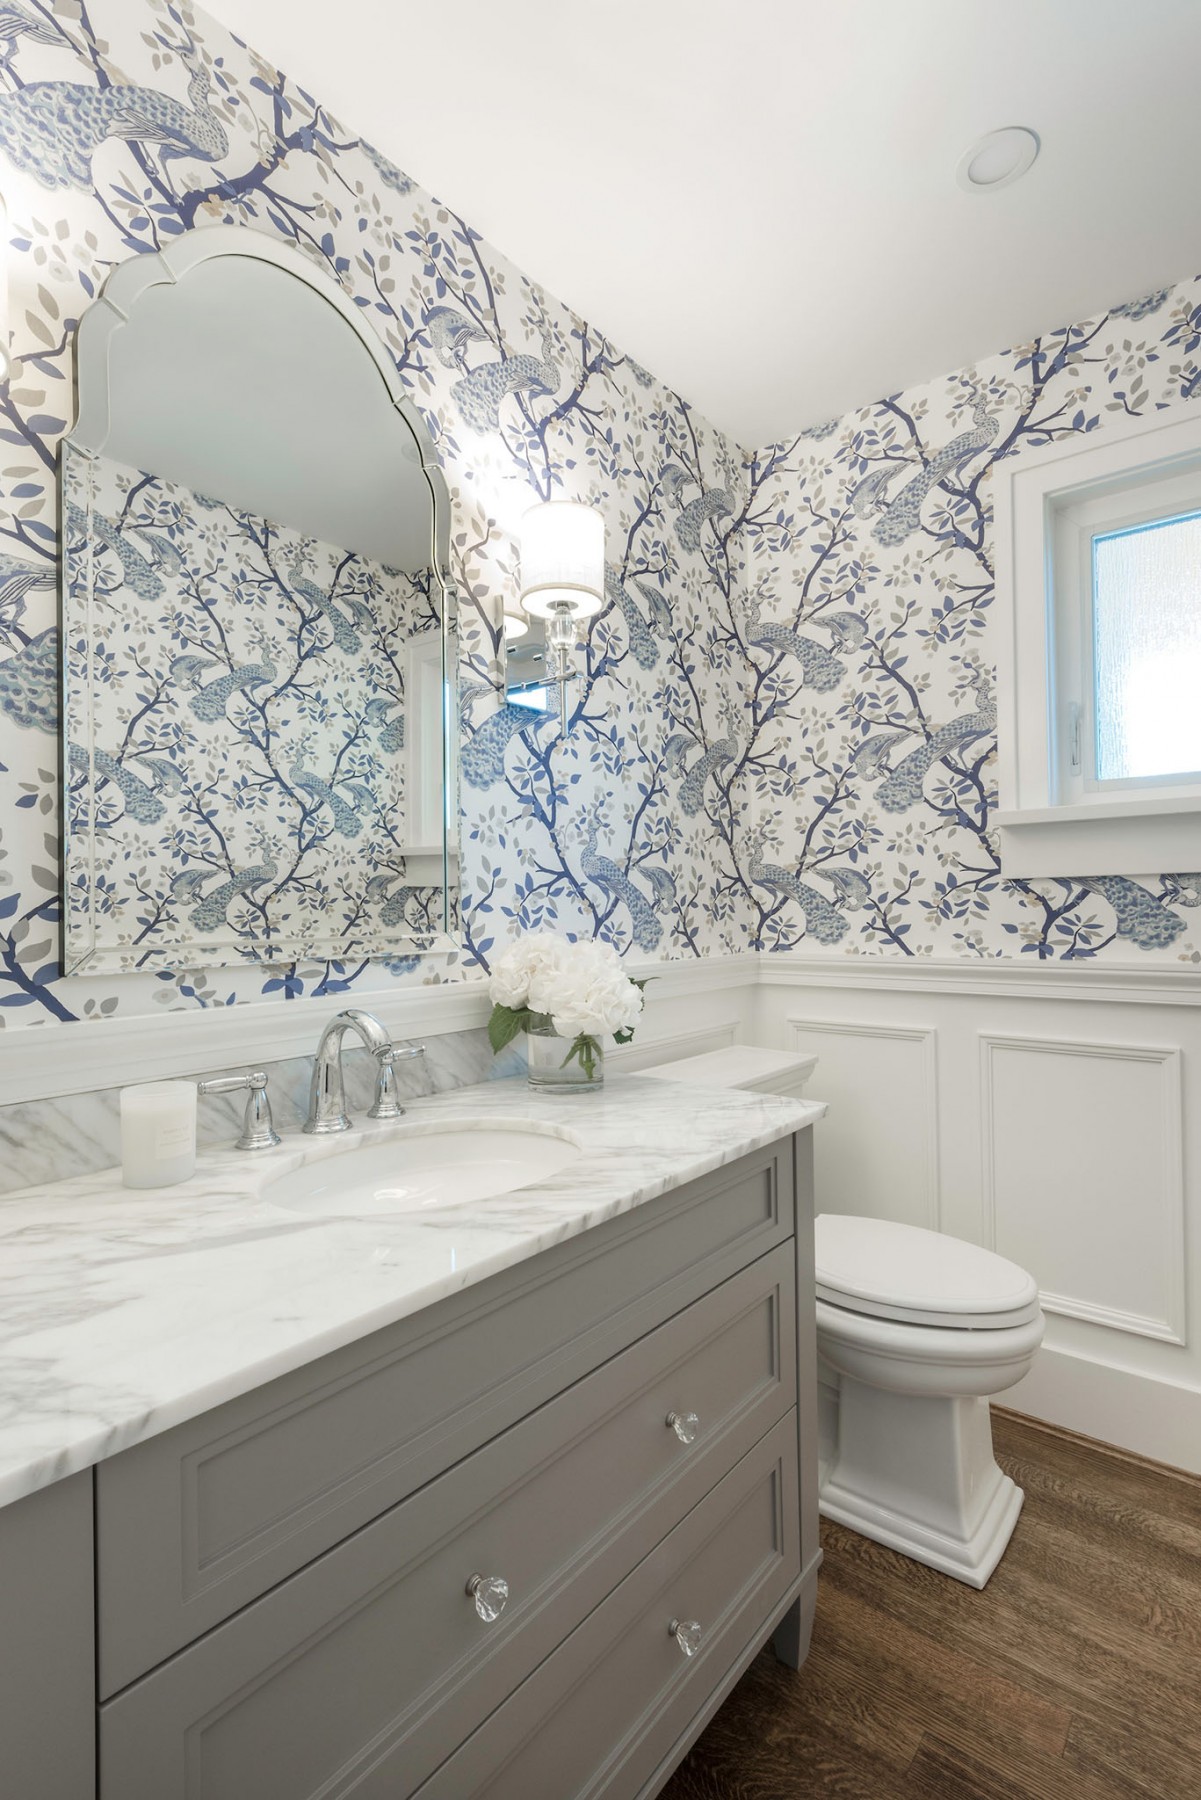 Stylehaven Interior Design - Vancouver Character Addition & Renovation - Powder Room